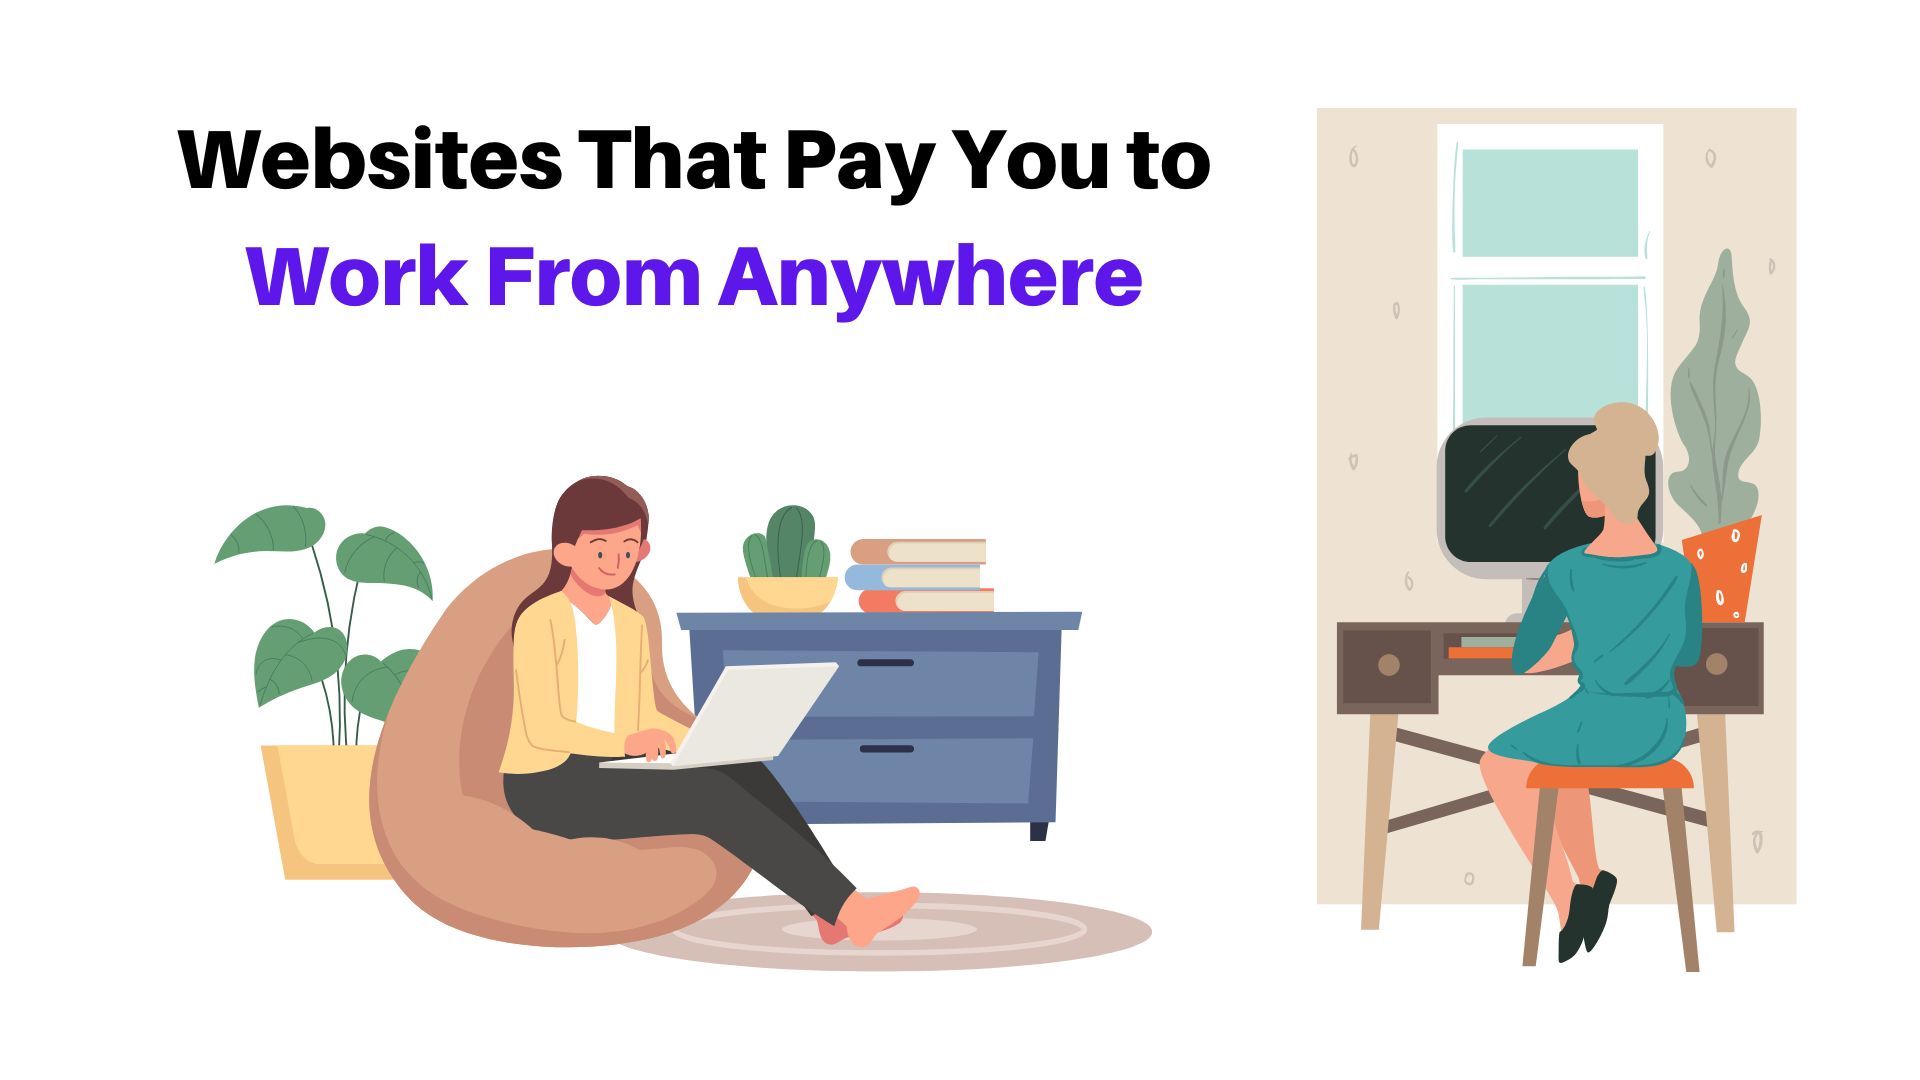 7 Websites That Pay You to Work From Anywhere